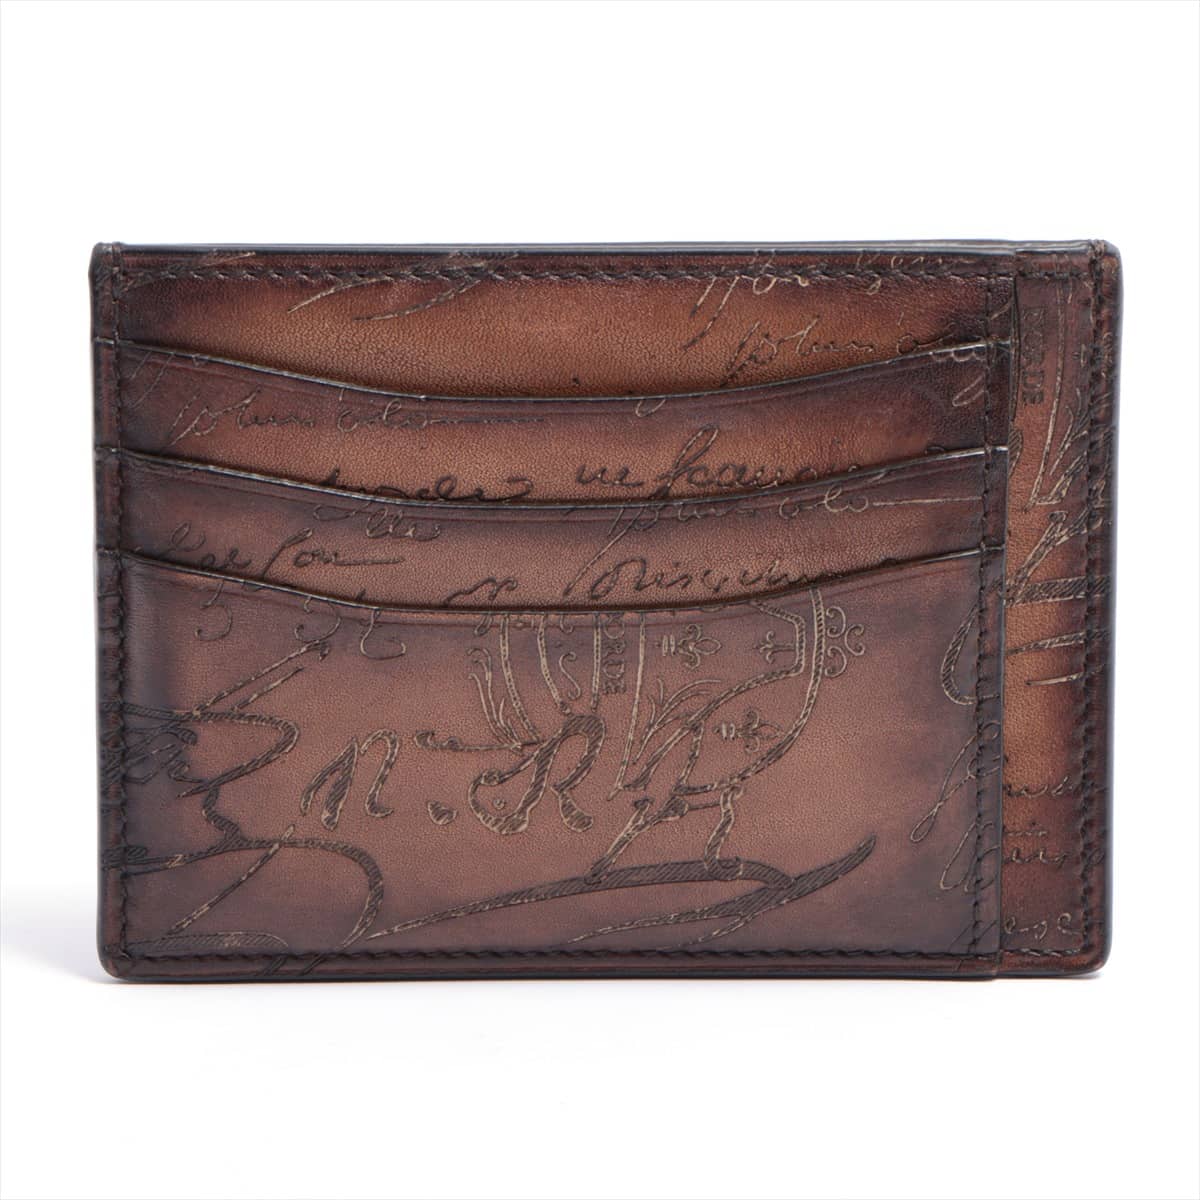 Berluti Calligraphy Leather Card Case Brown